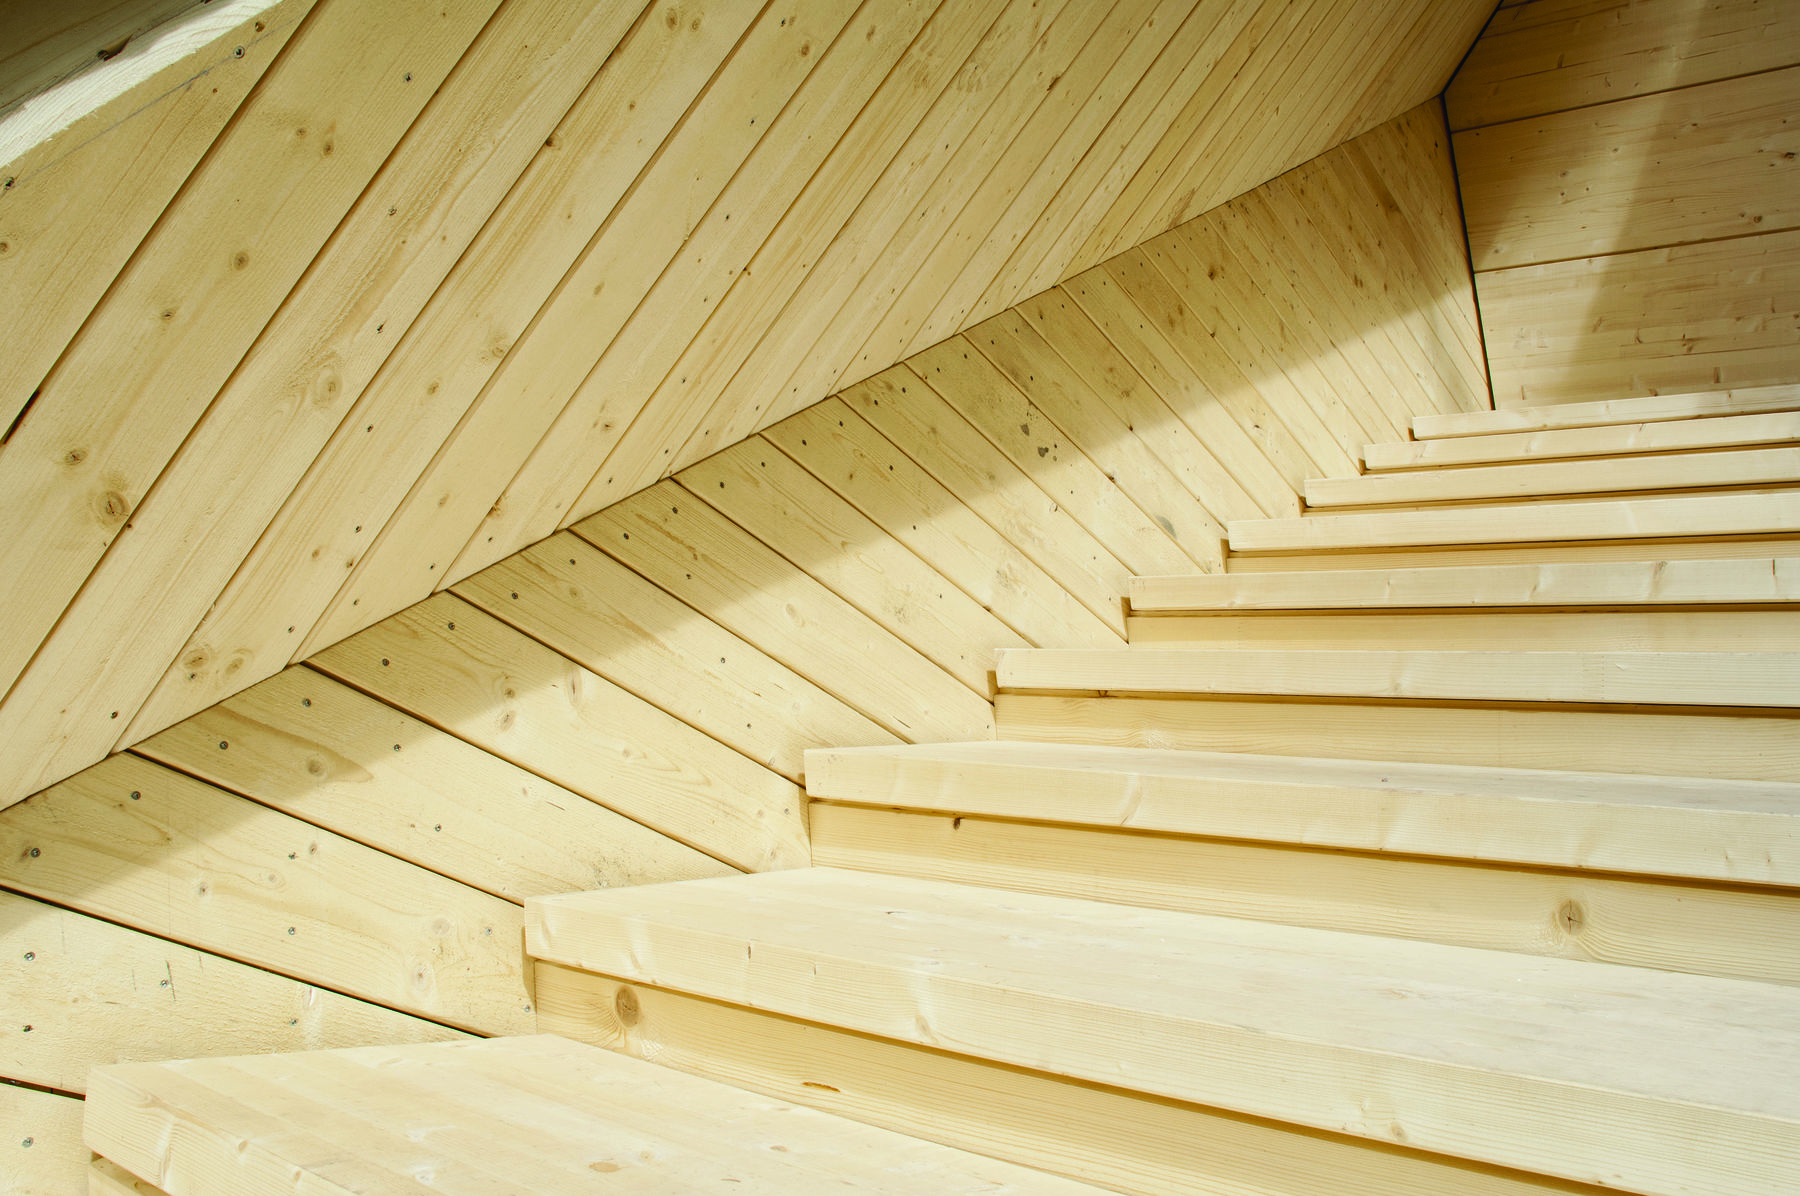 The terrace stairs of the Koe smoke sauna invite to experience the traditional smoke sauna in a new way. The experimental character of Alvar Aalto’s buildings at the site has been an inspiration for the project. Photo: Anne Kinnunen